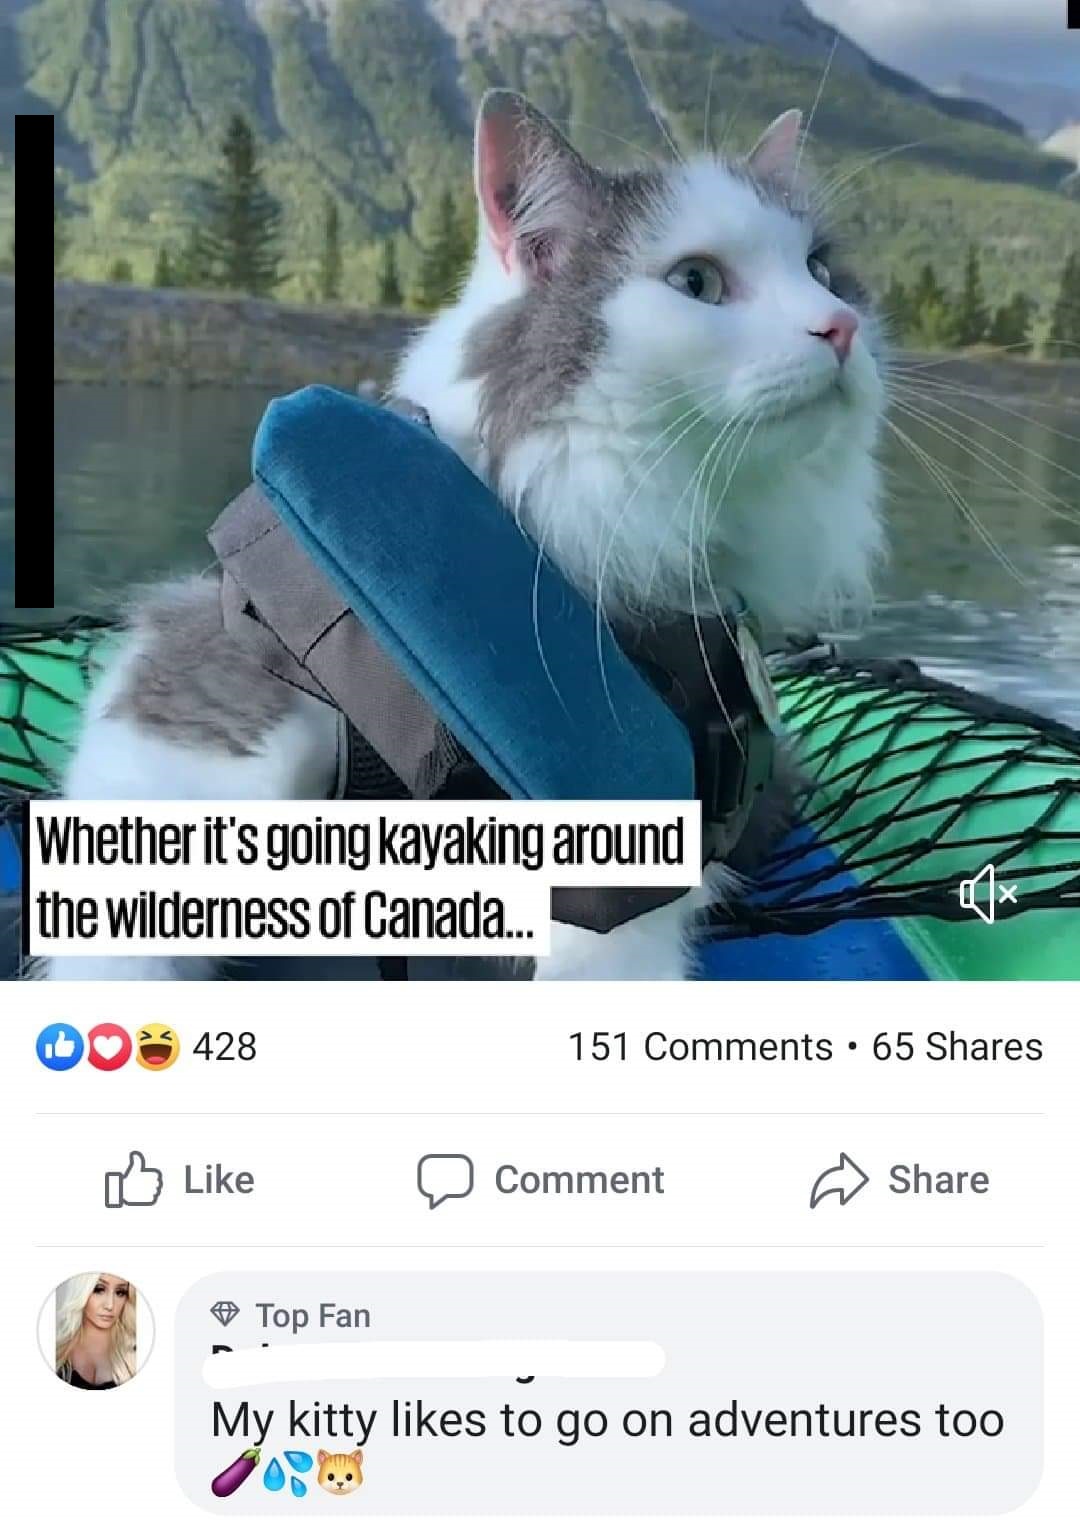 photo caption - Whether it's going kayaking around the wilderness of Canada.. 008 428 151 65 DComment Top Fan My kitty to go on adventures too